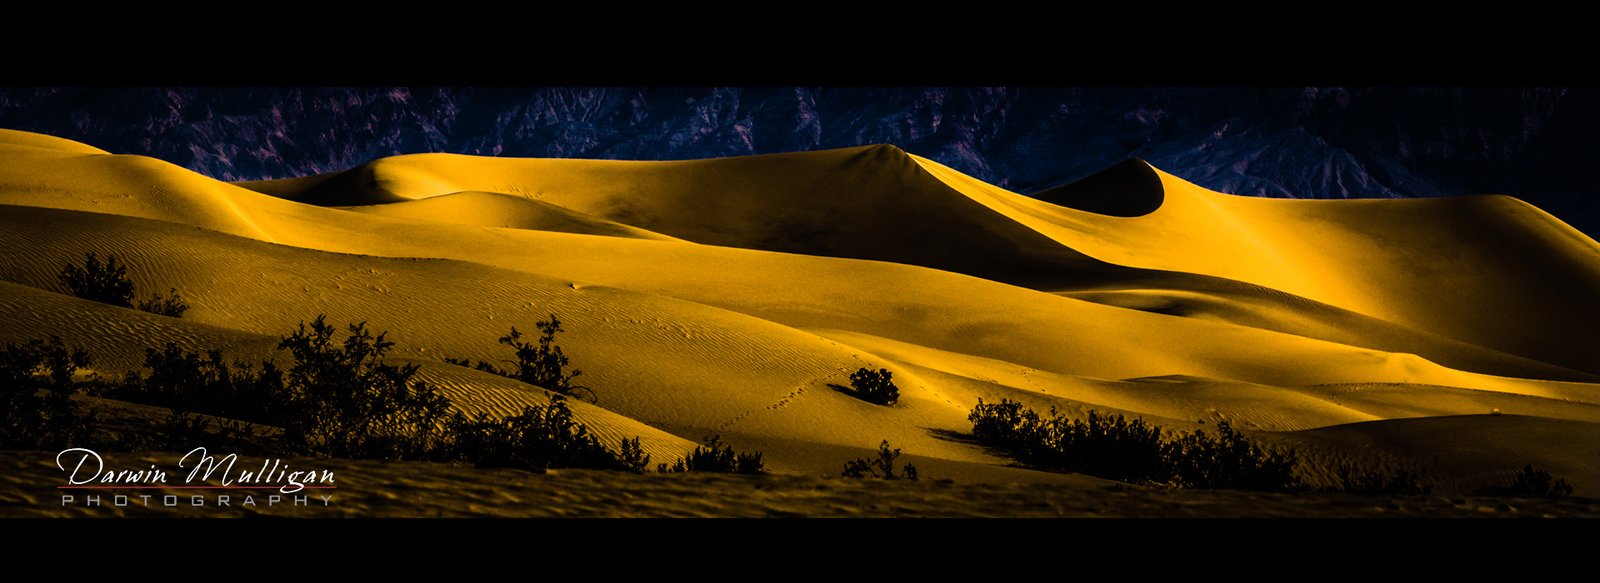 Sunset-Sand-Dunes-near-Stovepipe-Wells-Death-Valley-National-Park-California